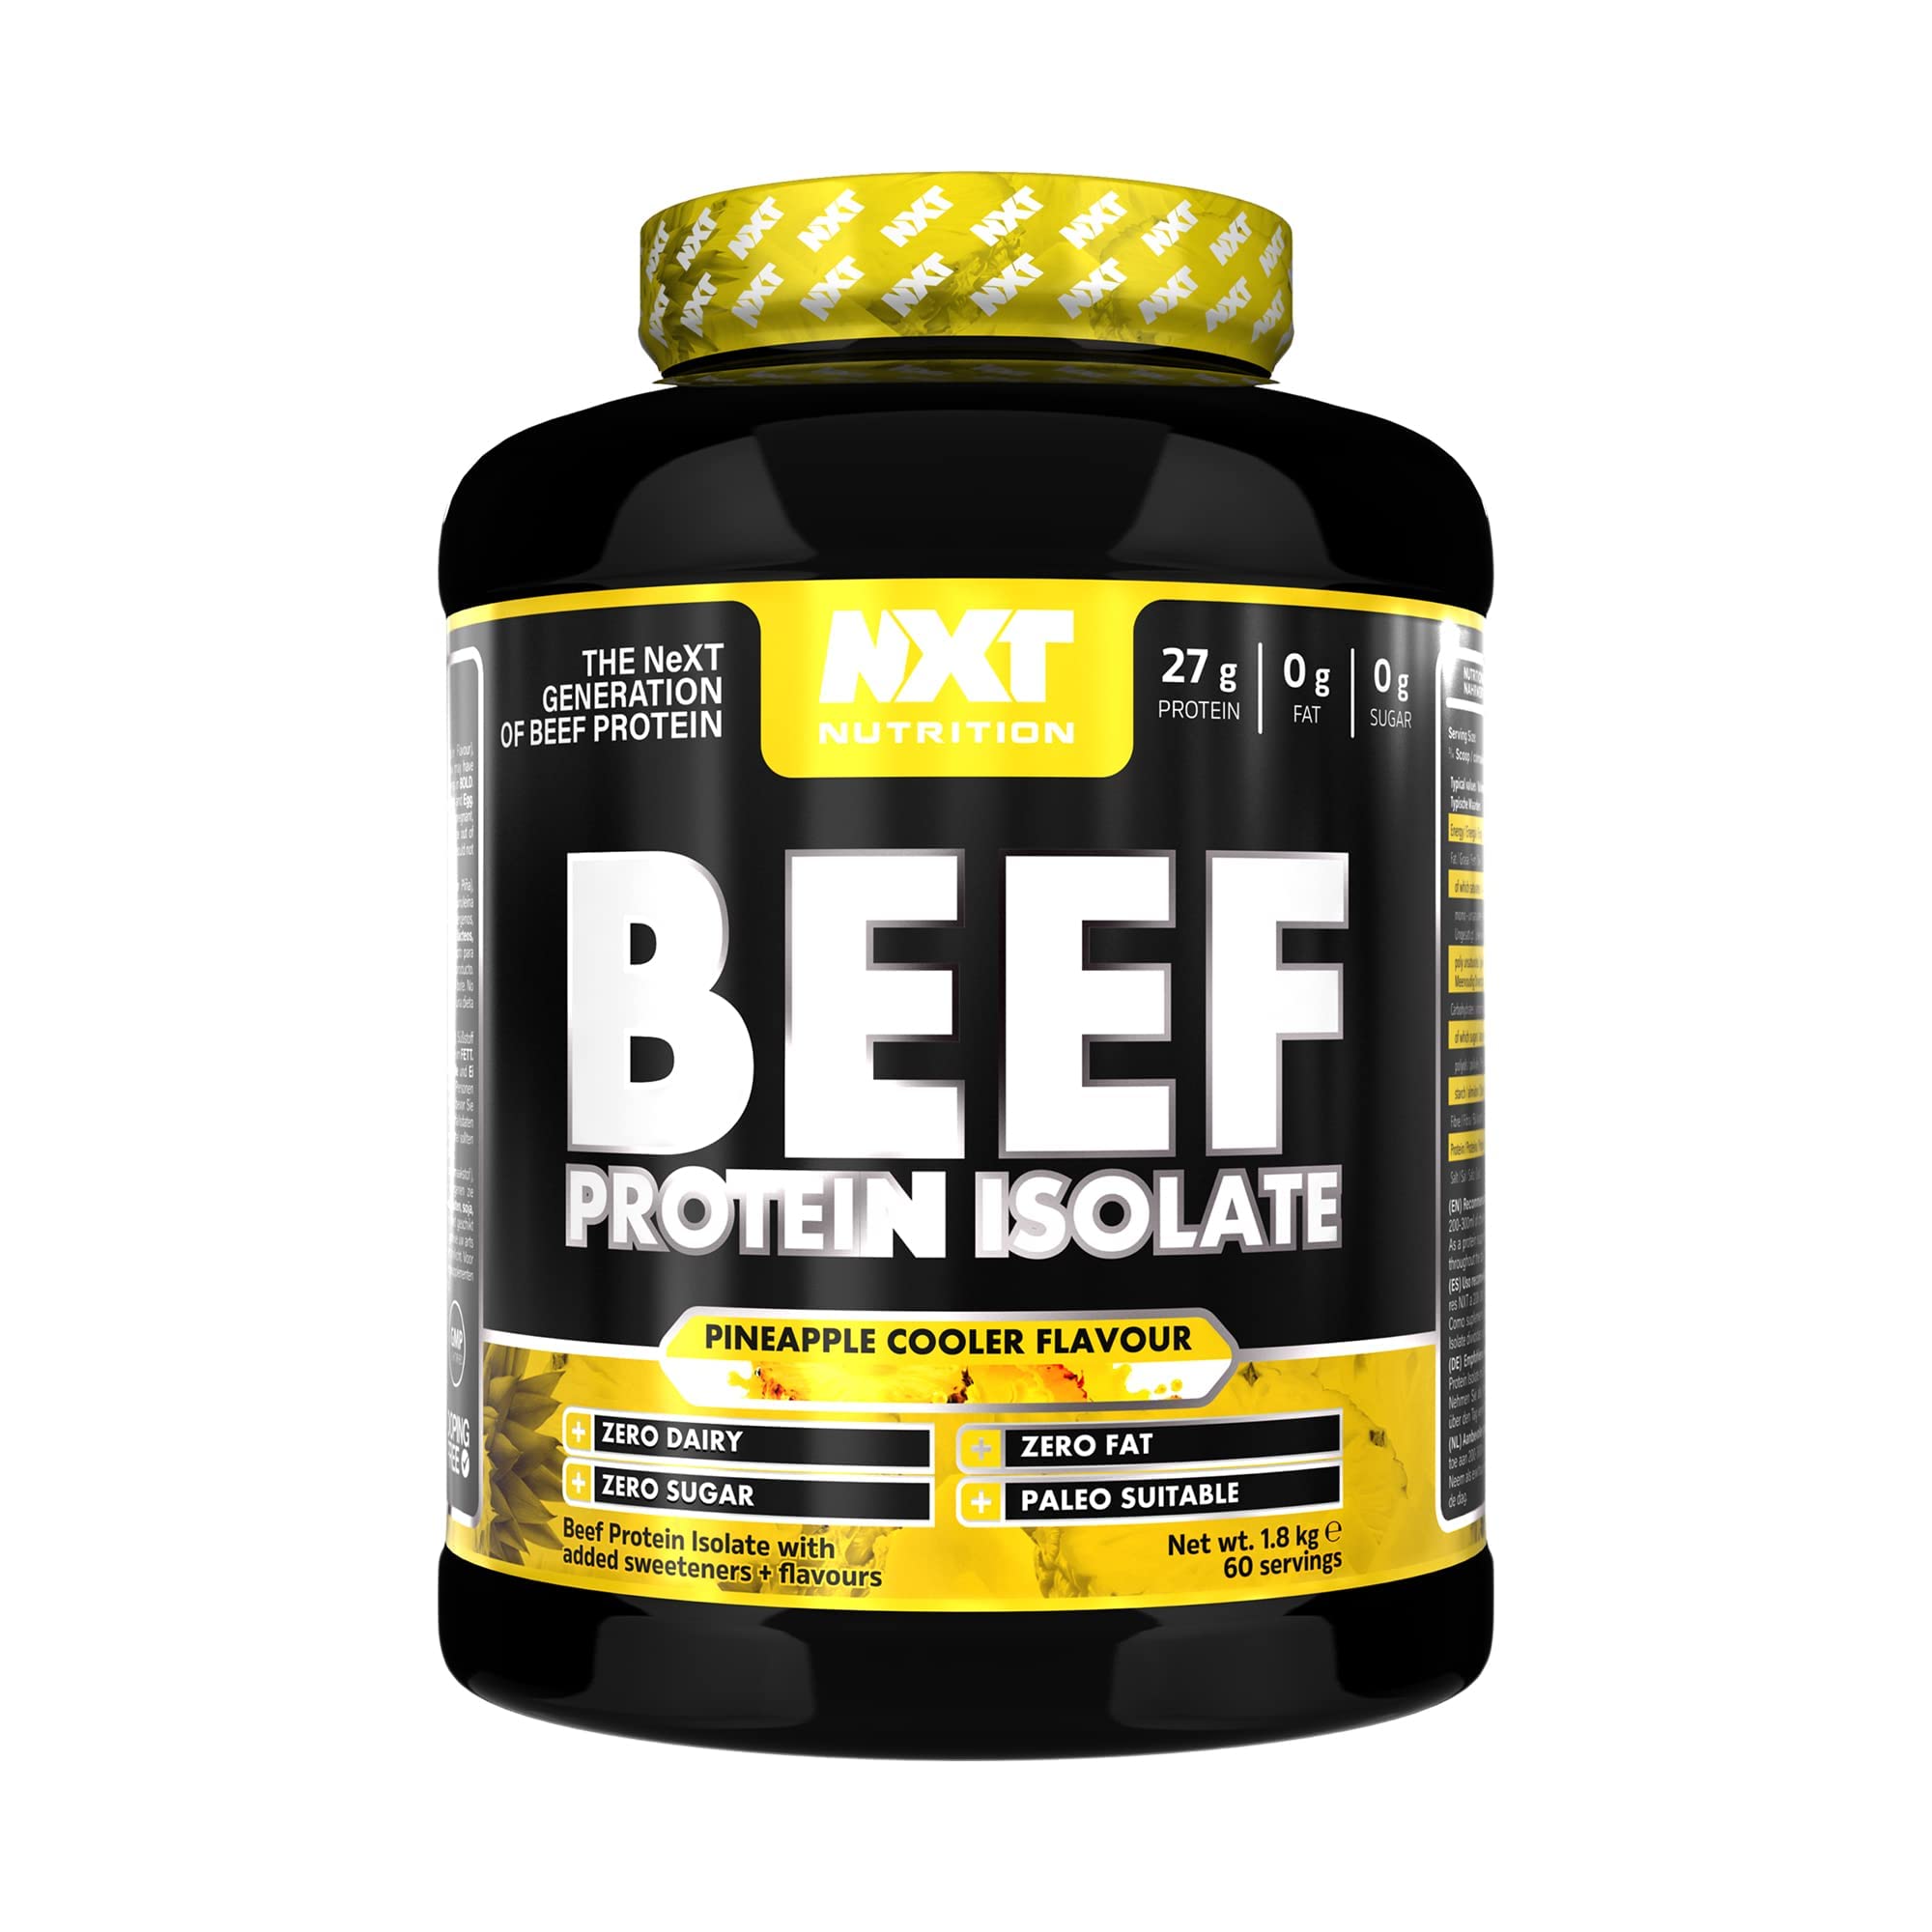 Beef Protein Isolate Pineapple Cooler Flavour